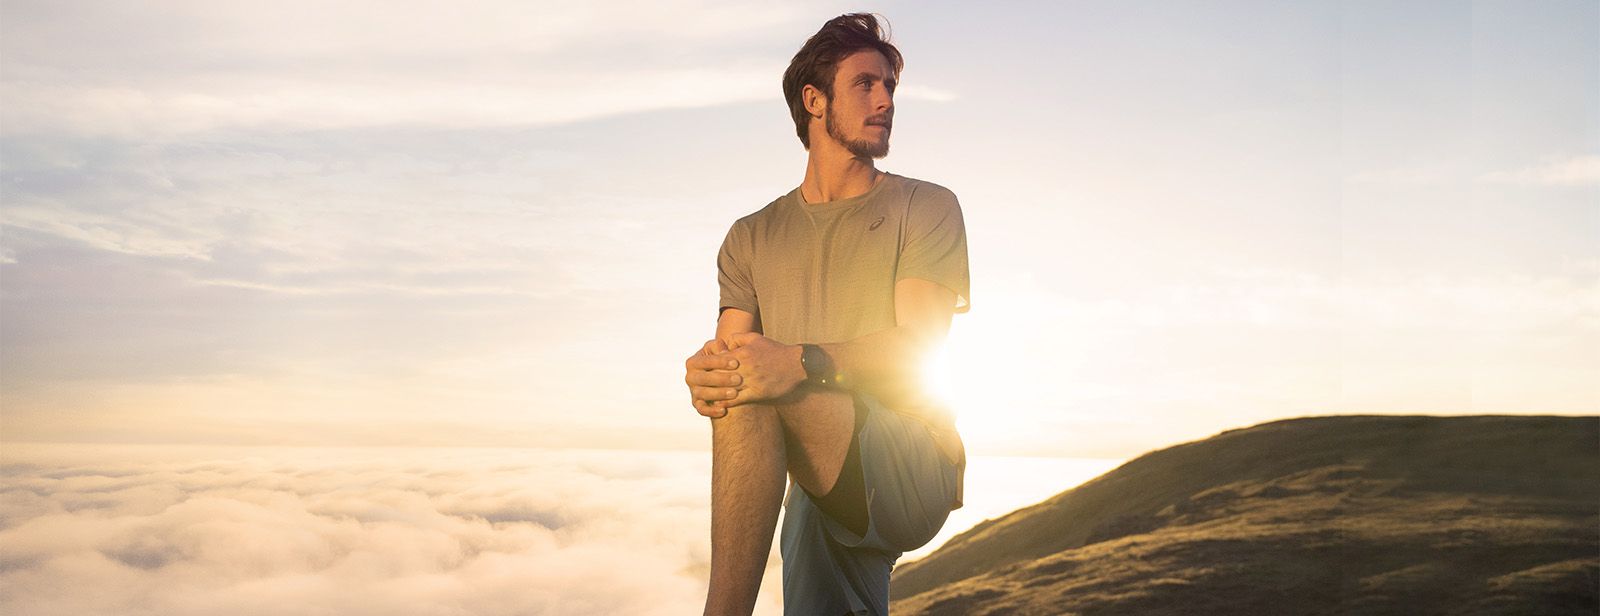 Man stretching on mountain top with ASICS clothing.